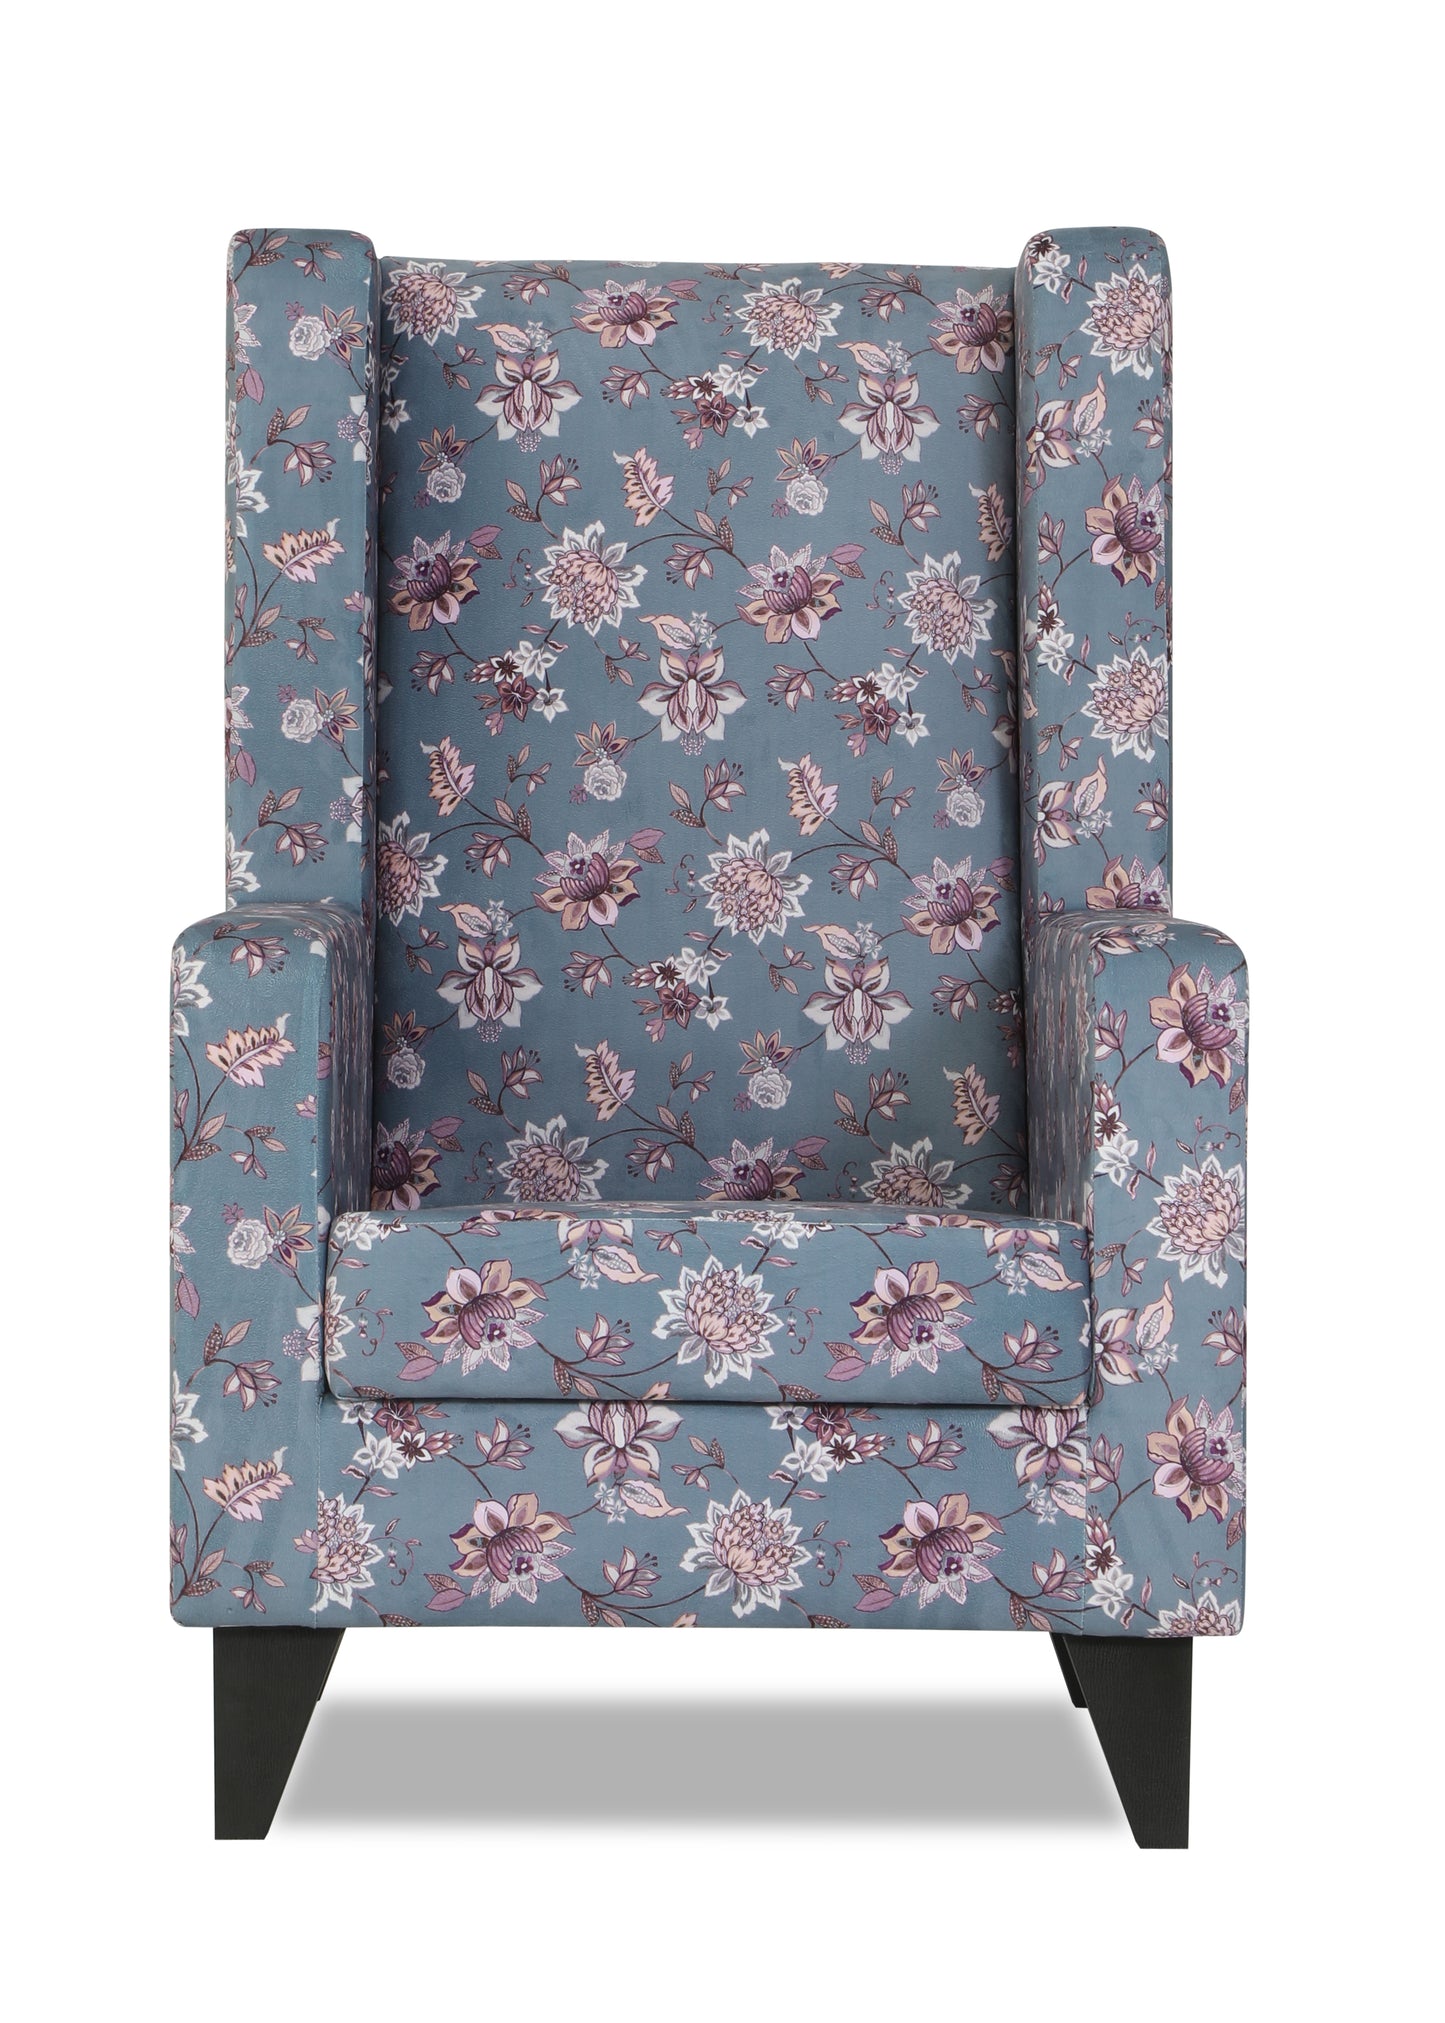 Adorn India Christopher 1 Seater Wing Chair Floral Print (Grey)